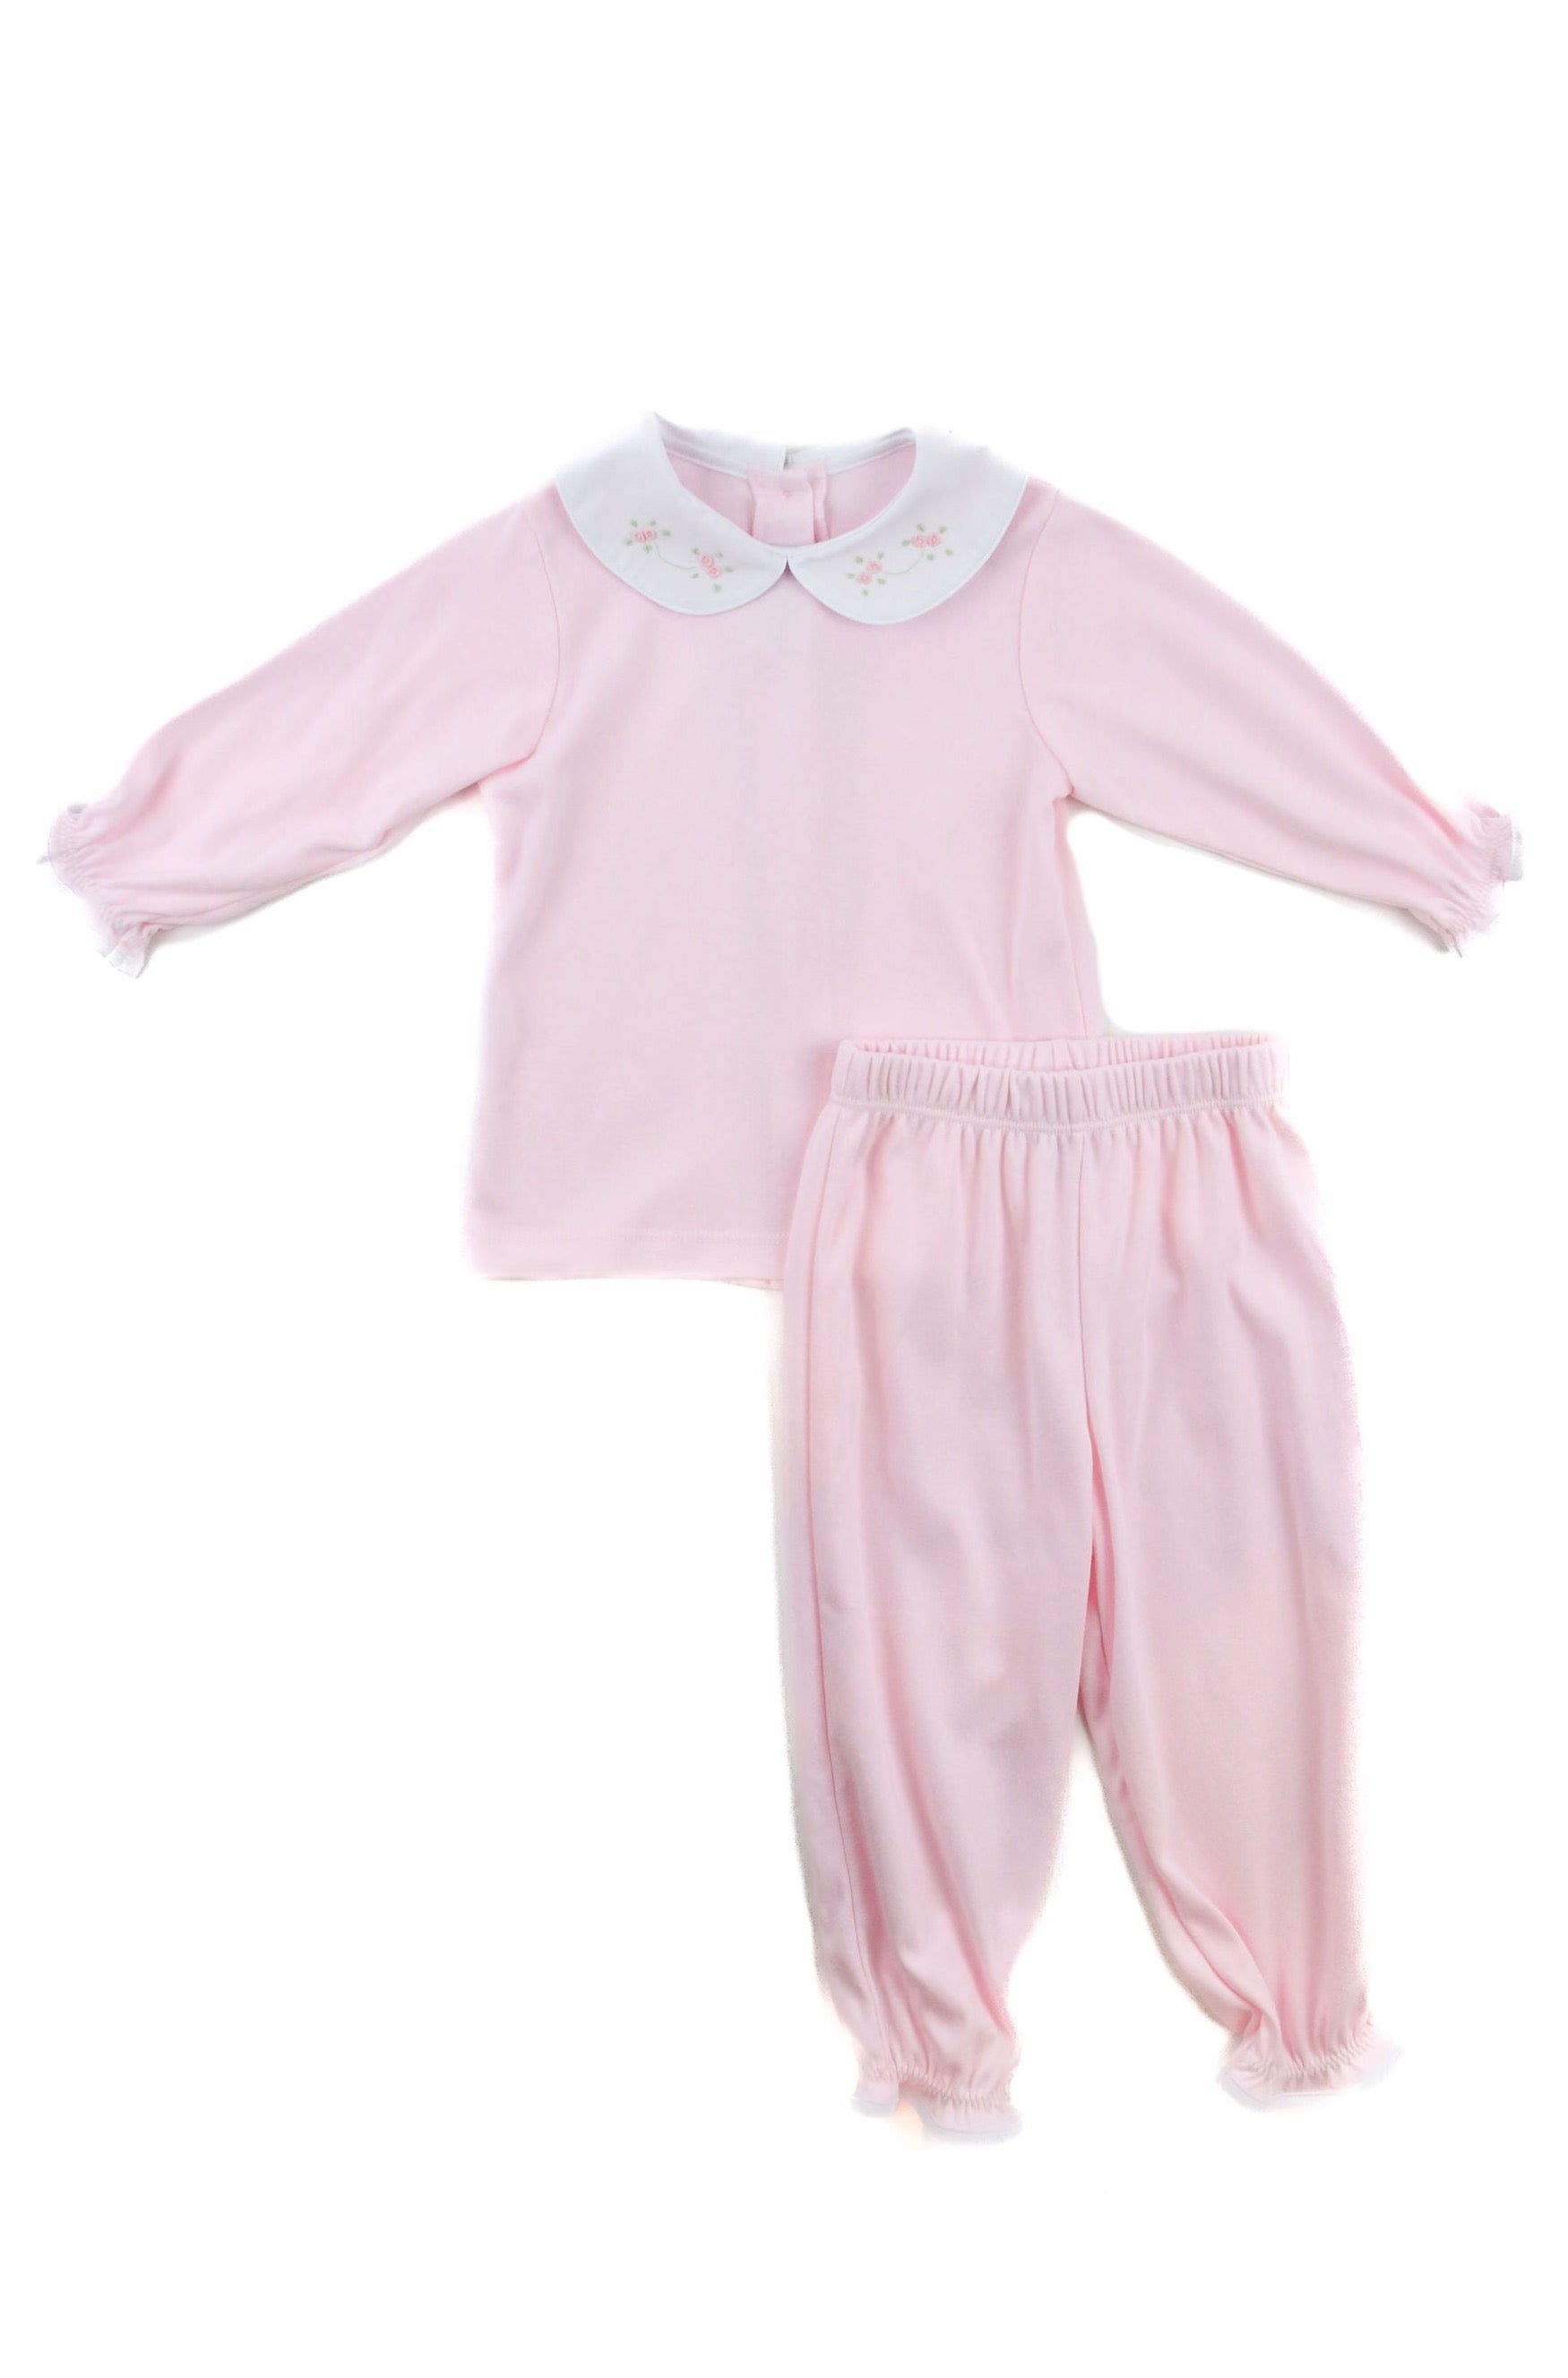 Auraluz Two Piece Knit Pant Set with Embroidered Tiny Buds